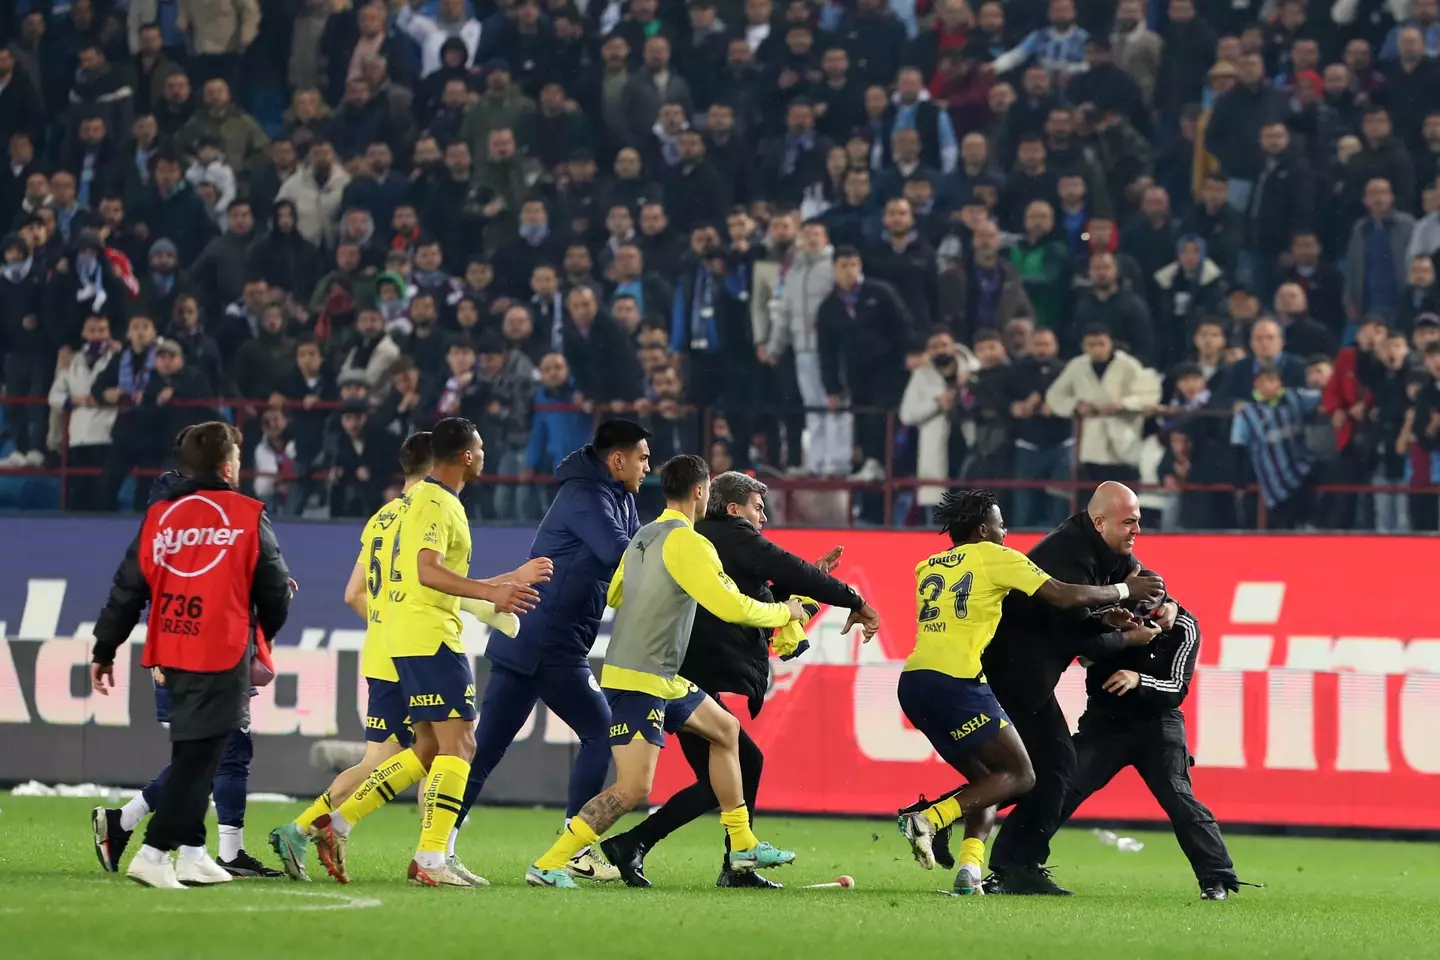 Trabzonspor fans invaded the pitch and attacked Fenerbahce players.